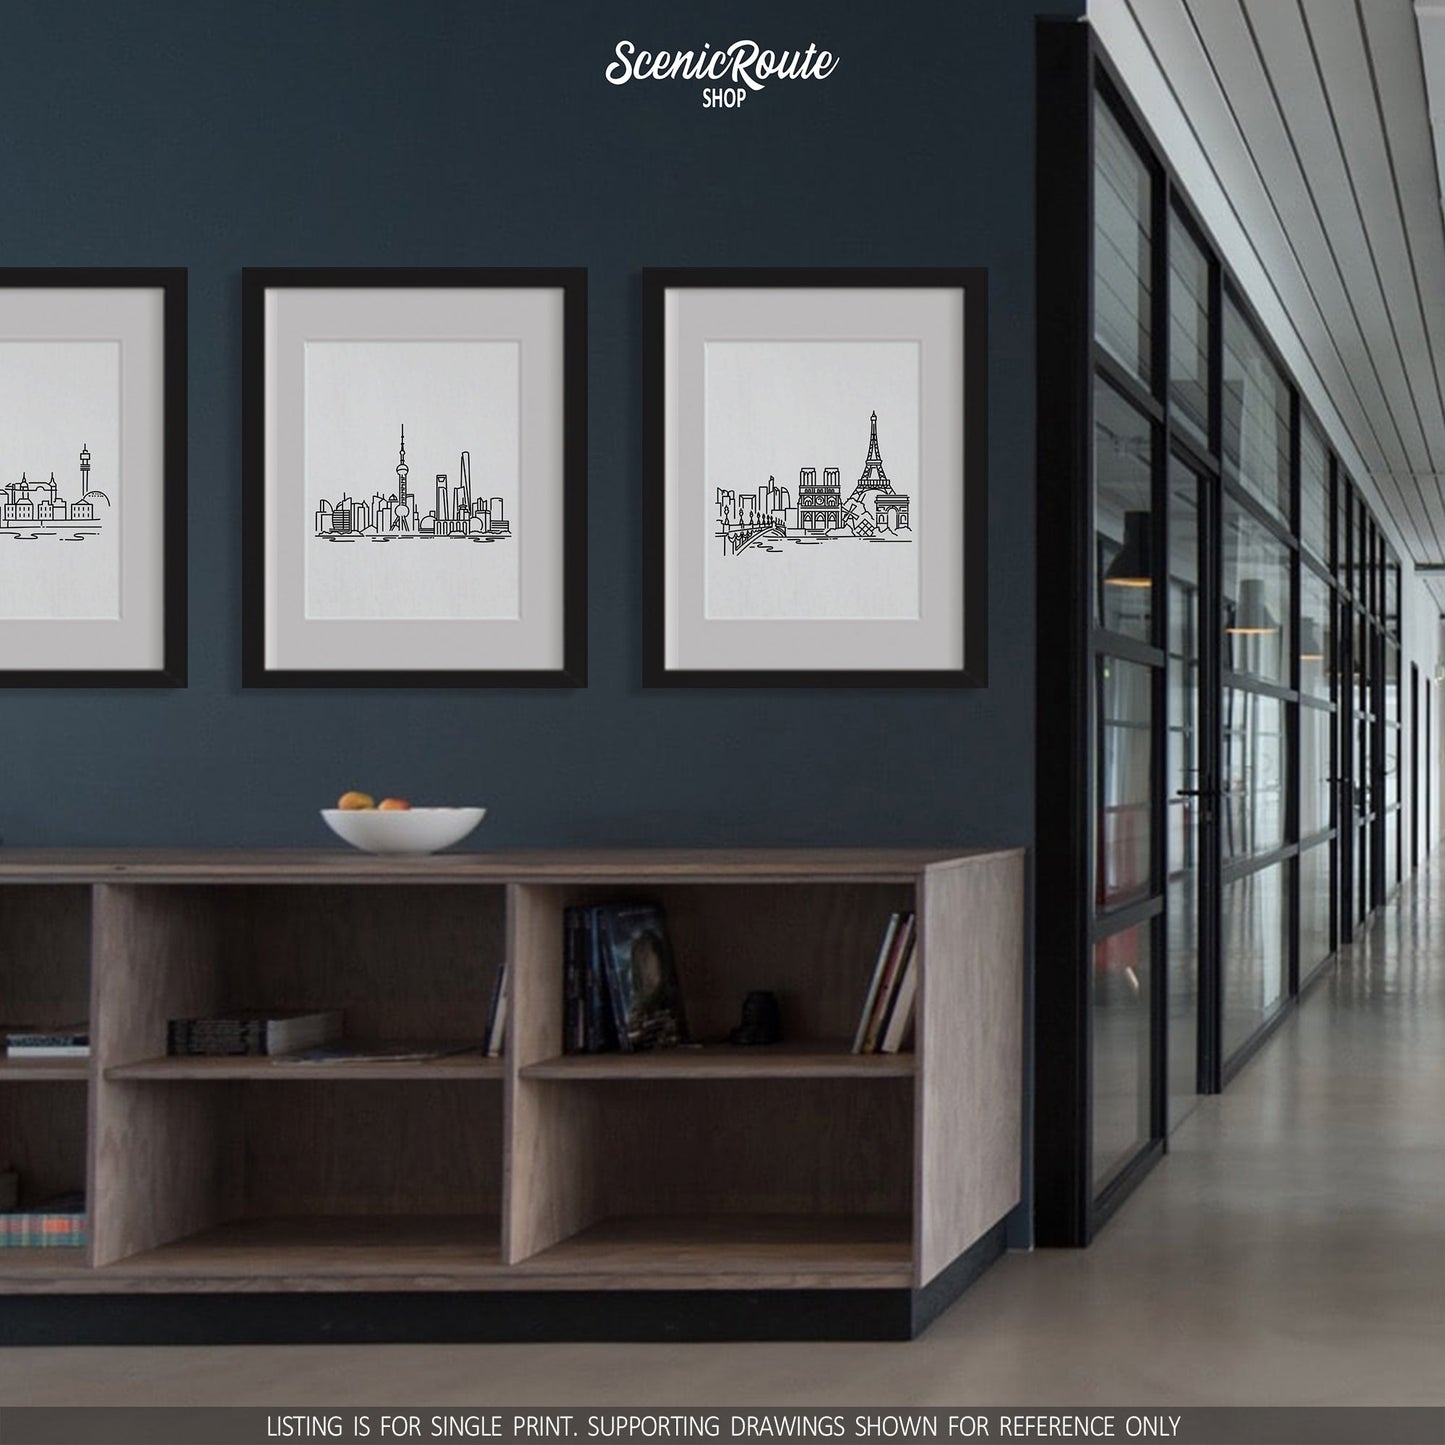 A group of three framed drawings hanging on the wall above cabinets in a modern office. The line art drawings include the Stockholm Skyline, Shanghai Skyline, and Paris Skyline